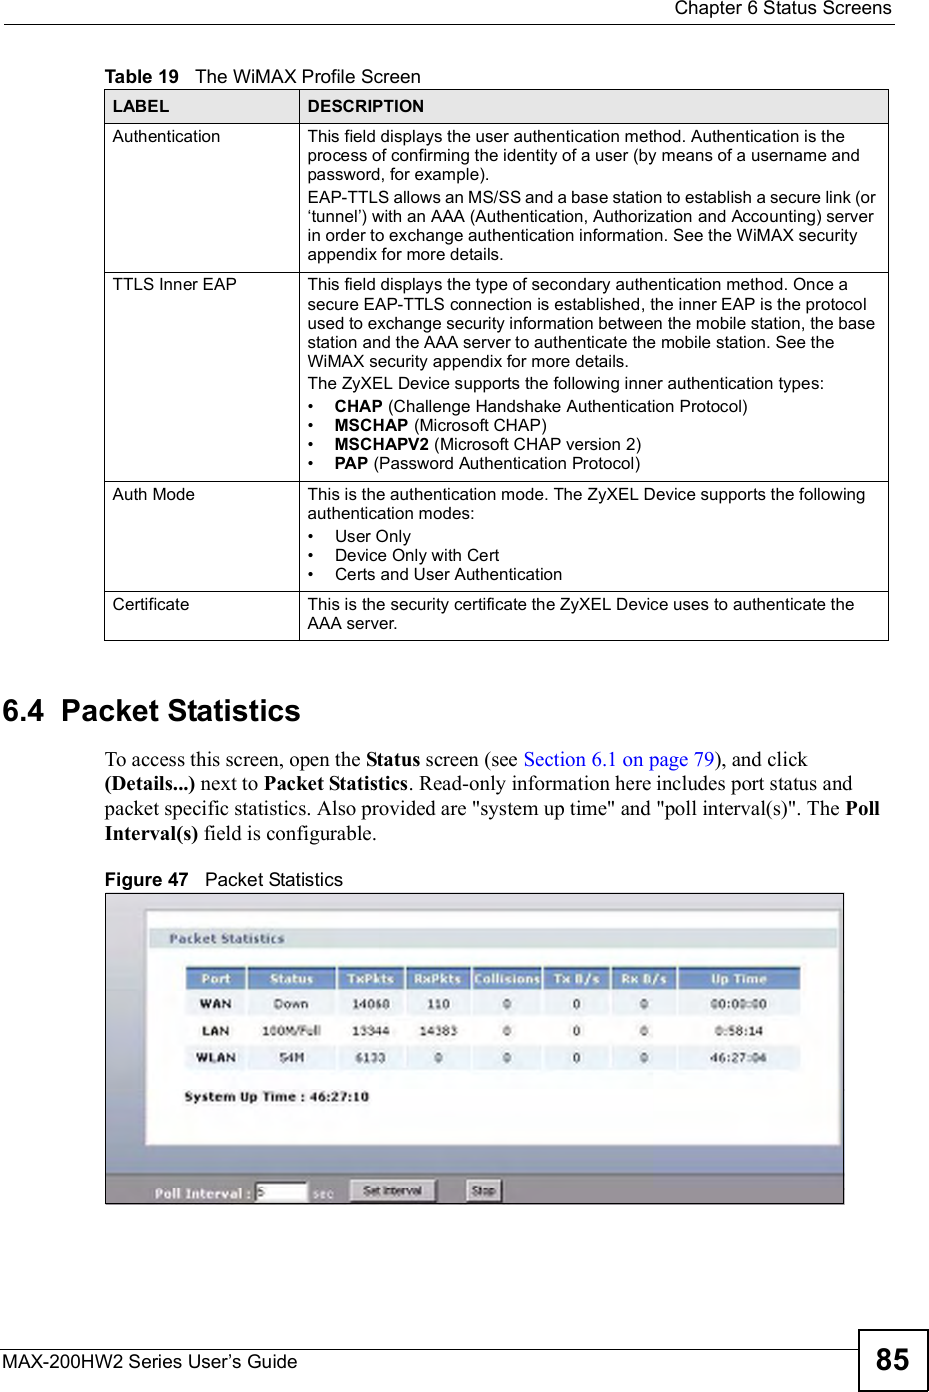  Chapter 6Status ScreensMAX-200HW2 Series User s Guide 856.4  Packet StatisticsTo access this screen, open the Status screen (see Section 6.1 on page 79), and click (Details...) next to Packet Statistics. Read-only information here includes port status and packet specific statistics. Also provided are &quot;system up time&quot; and &quot;poll interval(s)&quot;. The Poll Interval(s) field is configurable.Figure 47   Packet StatisticsAuthenticationThis field displays the user authentication method. Authentication is the process of confirming the identity of a user (by means of a username and password, for example).EAP-TTLS allows an MS/SS and a base station to establish a secure link (or $tunnel ) with an AAA (Authentication, Authorization and Accounting) server in order to exchange authentication information. See the WiMAX security appendix for more details.TTLS Inner EAPThis field displays the type of secondary authentication method. Once a secure EAP-TTLS connection is established, the inner EAP is the protocol used to exchange security information between the mobile station, the base station and the AAA server to authenticate the mobile station. See the WiMAX security appendix for more details.The ZyXEL Device supports the following inner authentication types:#CHAP (Challenge Handshake Authentication Protocol)#MSCHAP (Microsoft CHAP)#MSCHAPV2 (Microsoft CHAP version 2)#PAP (Password Authentication Protocol)Auth ModeThis is the authentication mode. The ZyXEL Device supports the following authentication modes:#User Only#Device Only with Cert#Certs and User AuthenticationCertificateThis is the security certificate the ZyXEL Device uses to authenticate the AAA server.Table 19   The WiMAX Profile ScreenLABEL DESCRIPTION